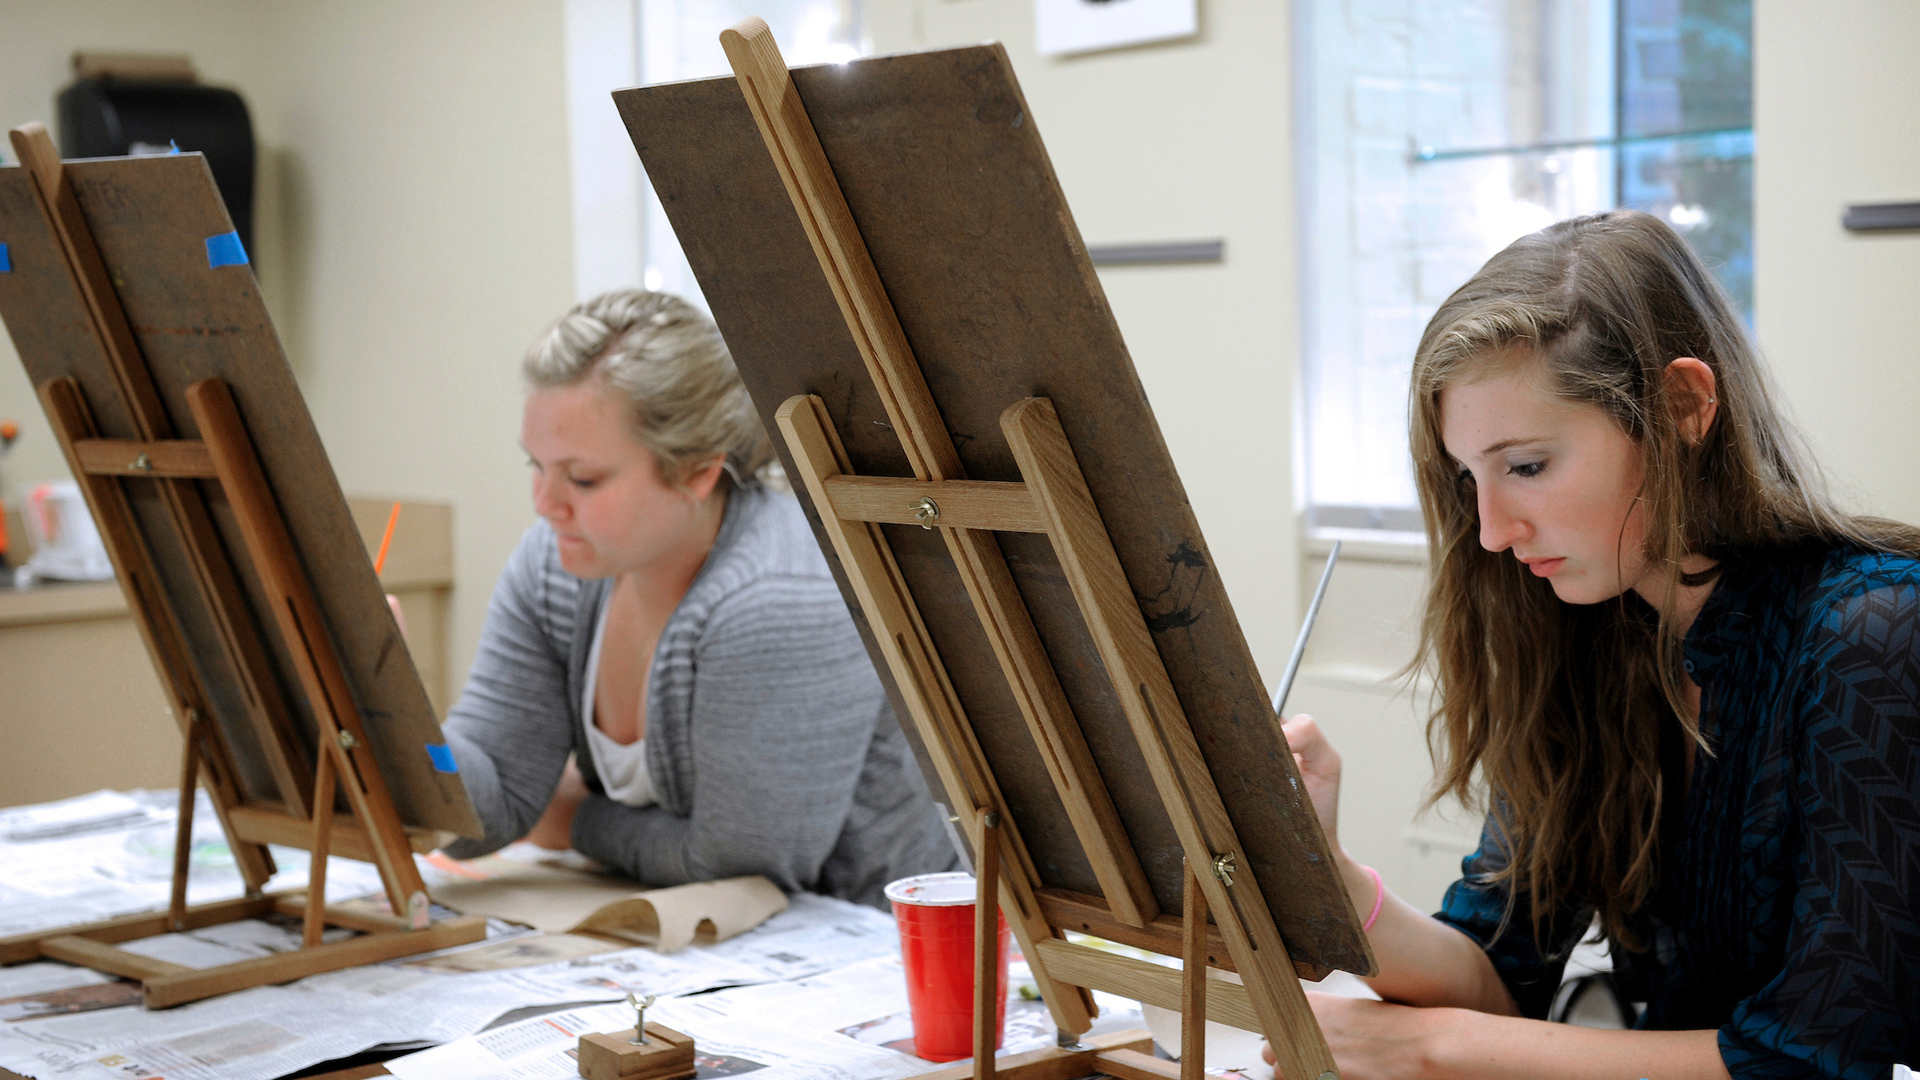 Young adults paint at easels during a course at the NC State Crafts Center.